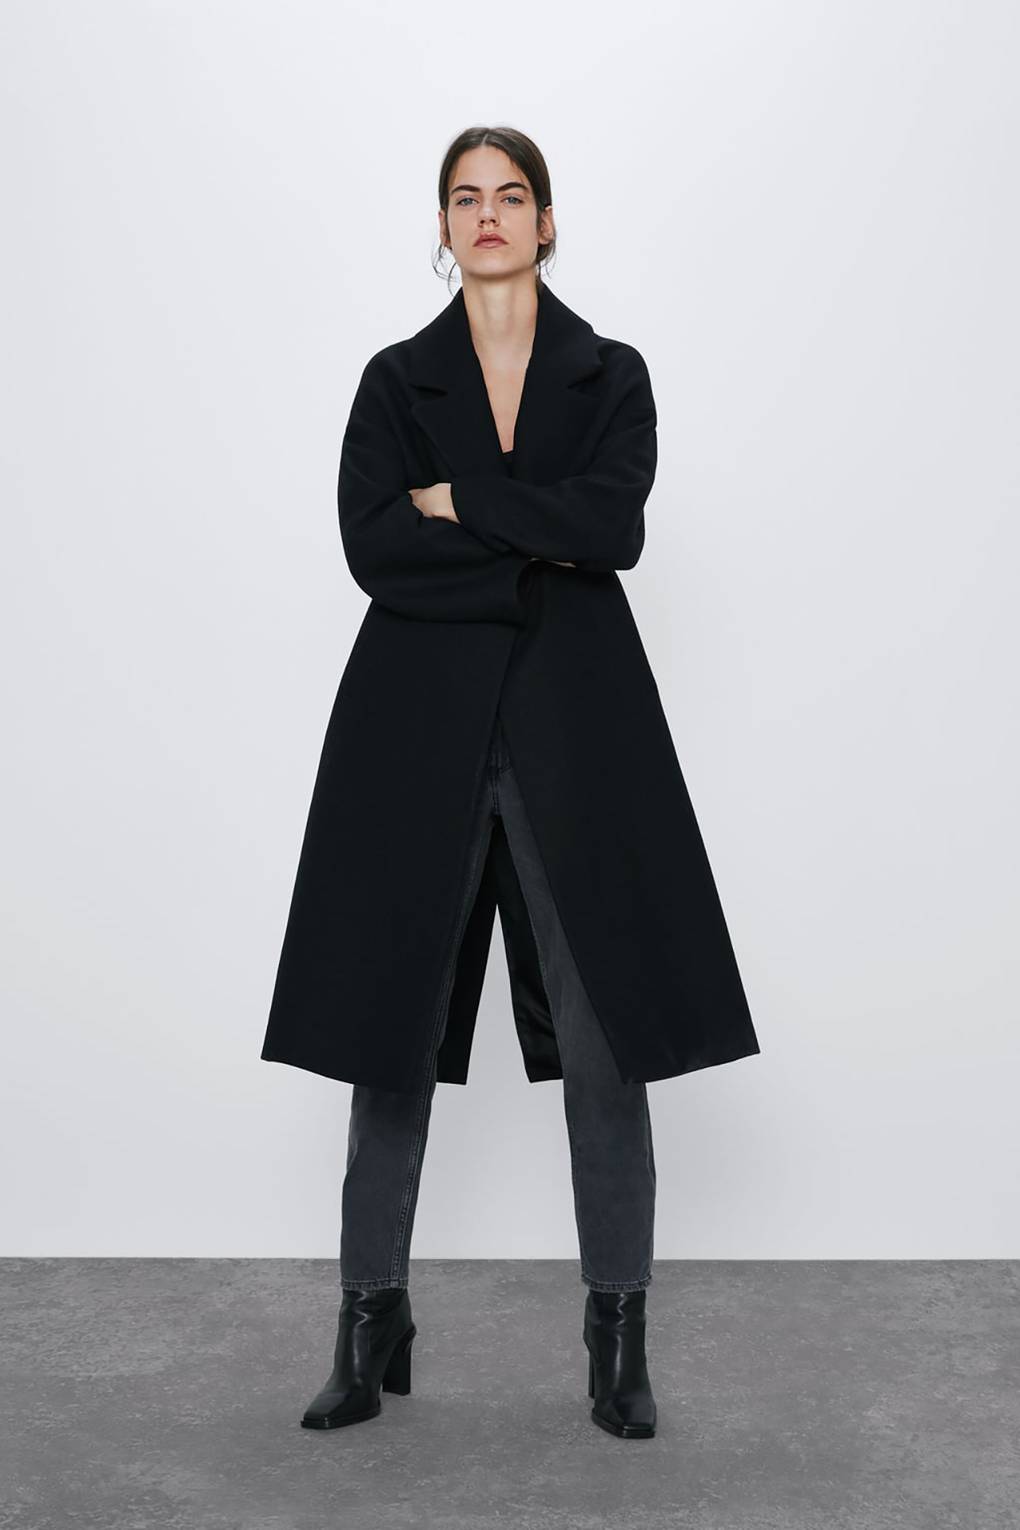 Zara Winter Coat Collection 2019 Our Top Picks  Glamour UK